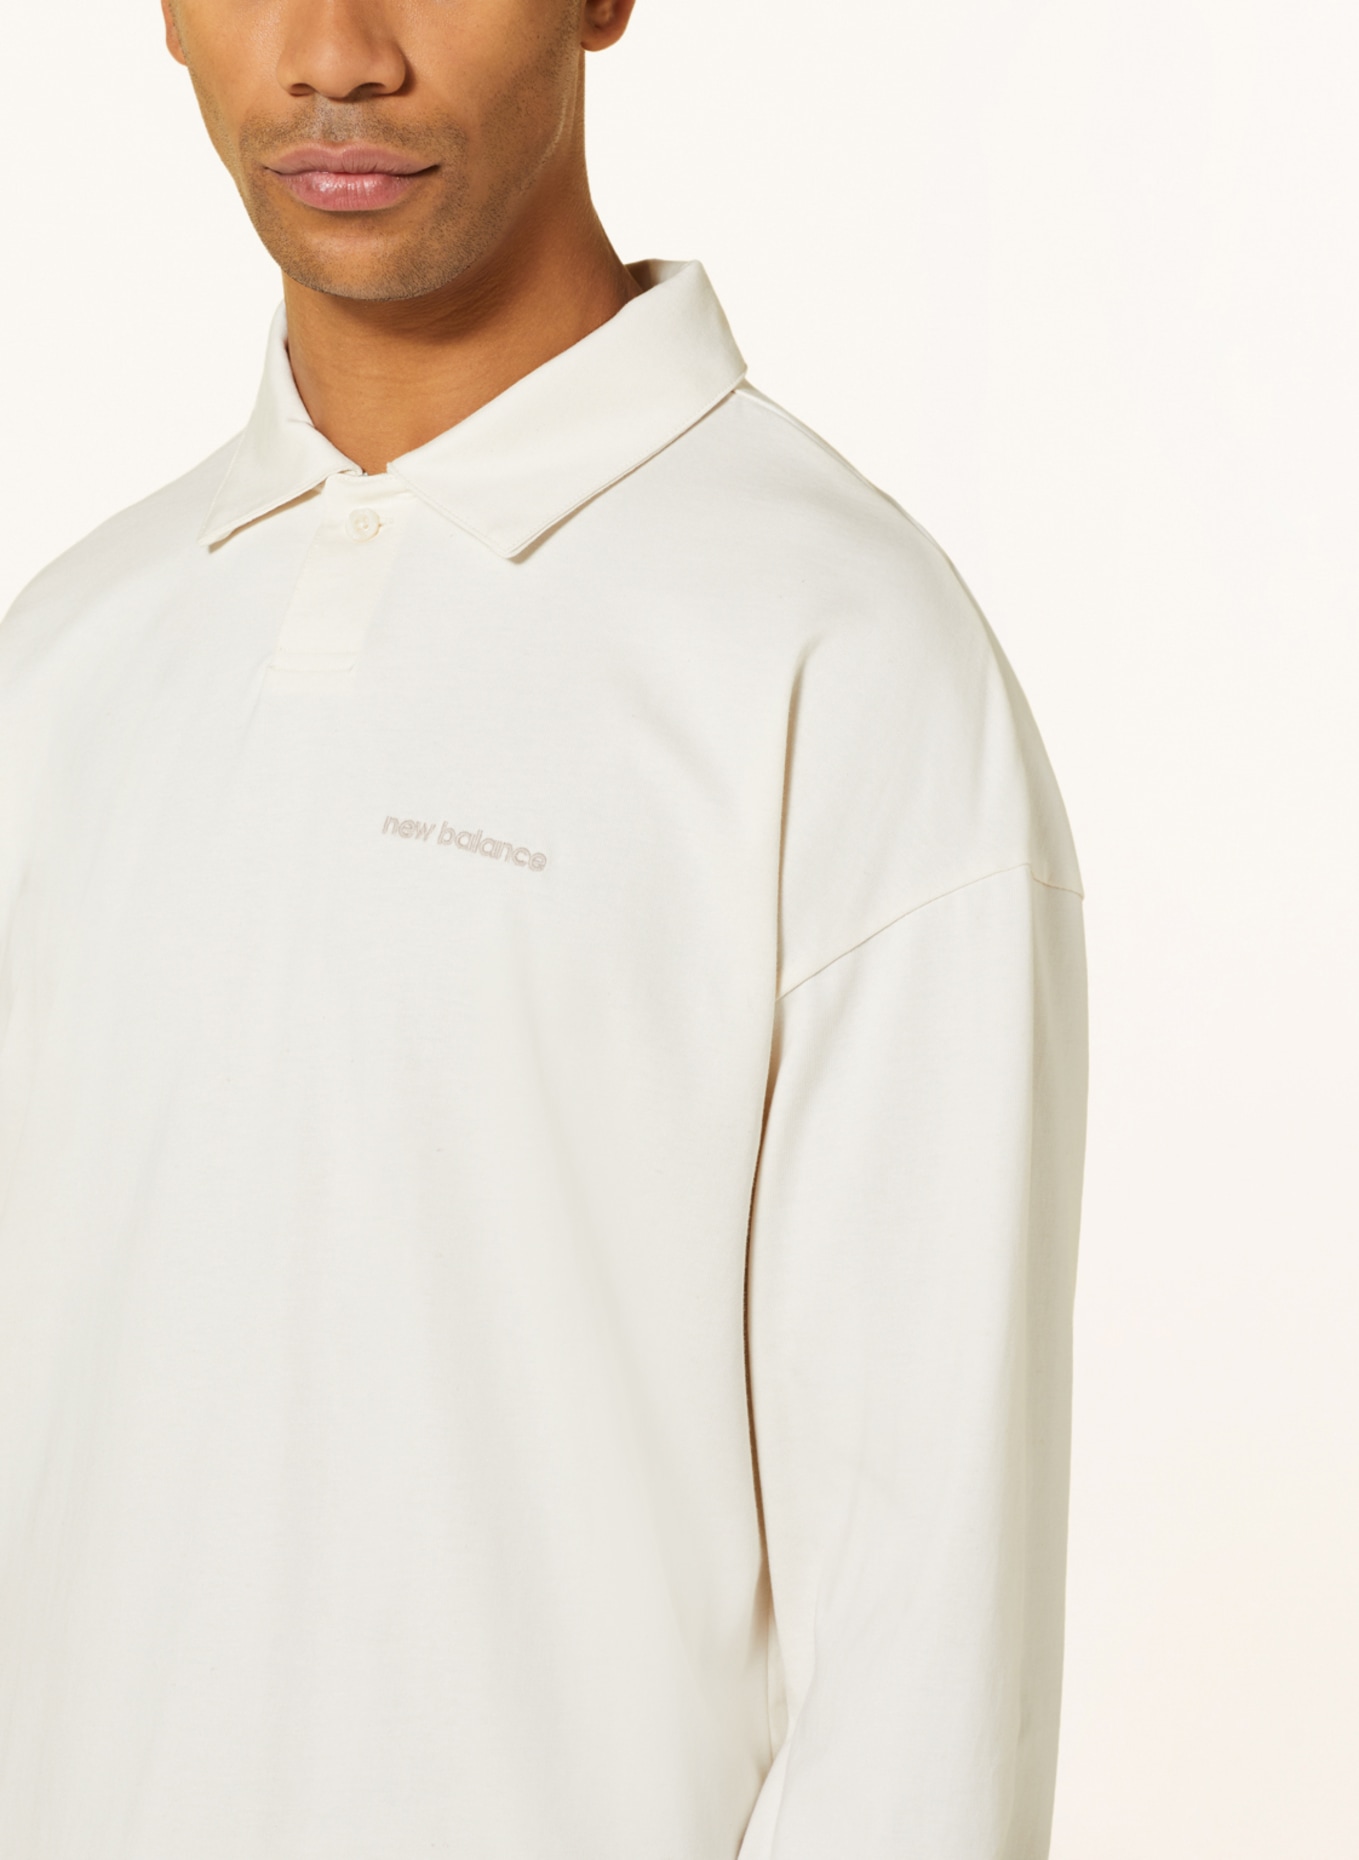 new balance Jersey polo shirt ATHLETICS LINEAR relaxed fit, Color: CREAM (Image 4)